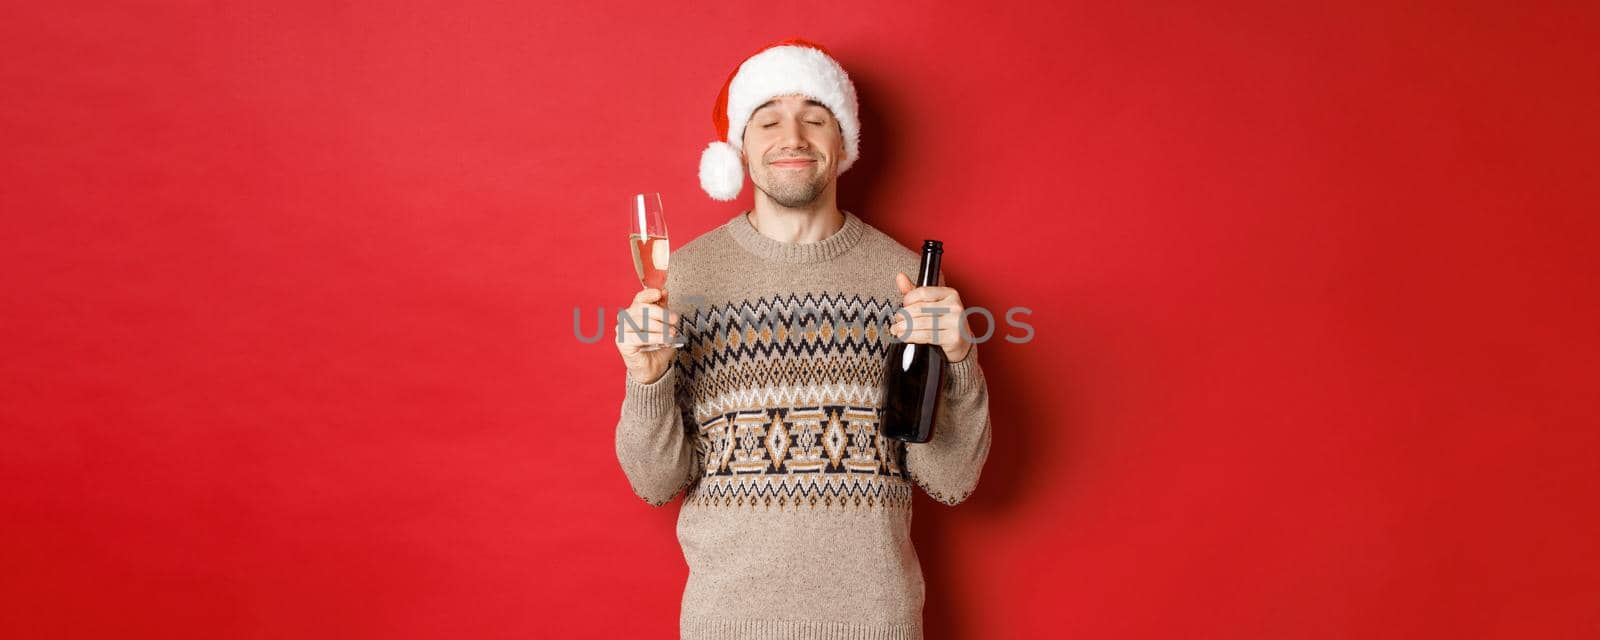 Concept of winter holidays, christmas and celebration. Image of pleased smiling man in santa hat and sweater, drinking on new year, holding bottle of champagne and filled glass, red background.